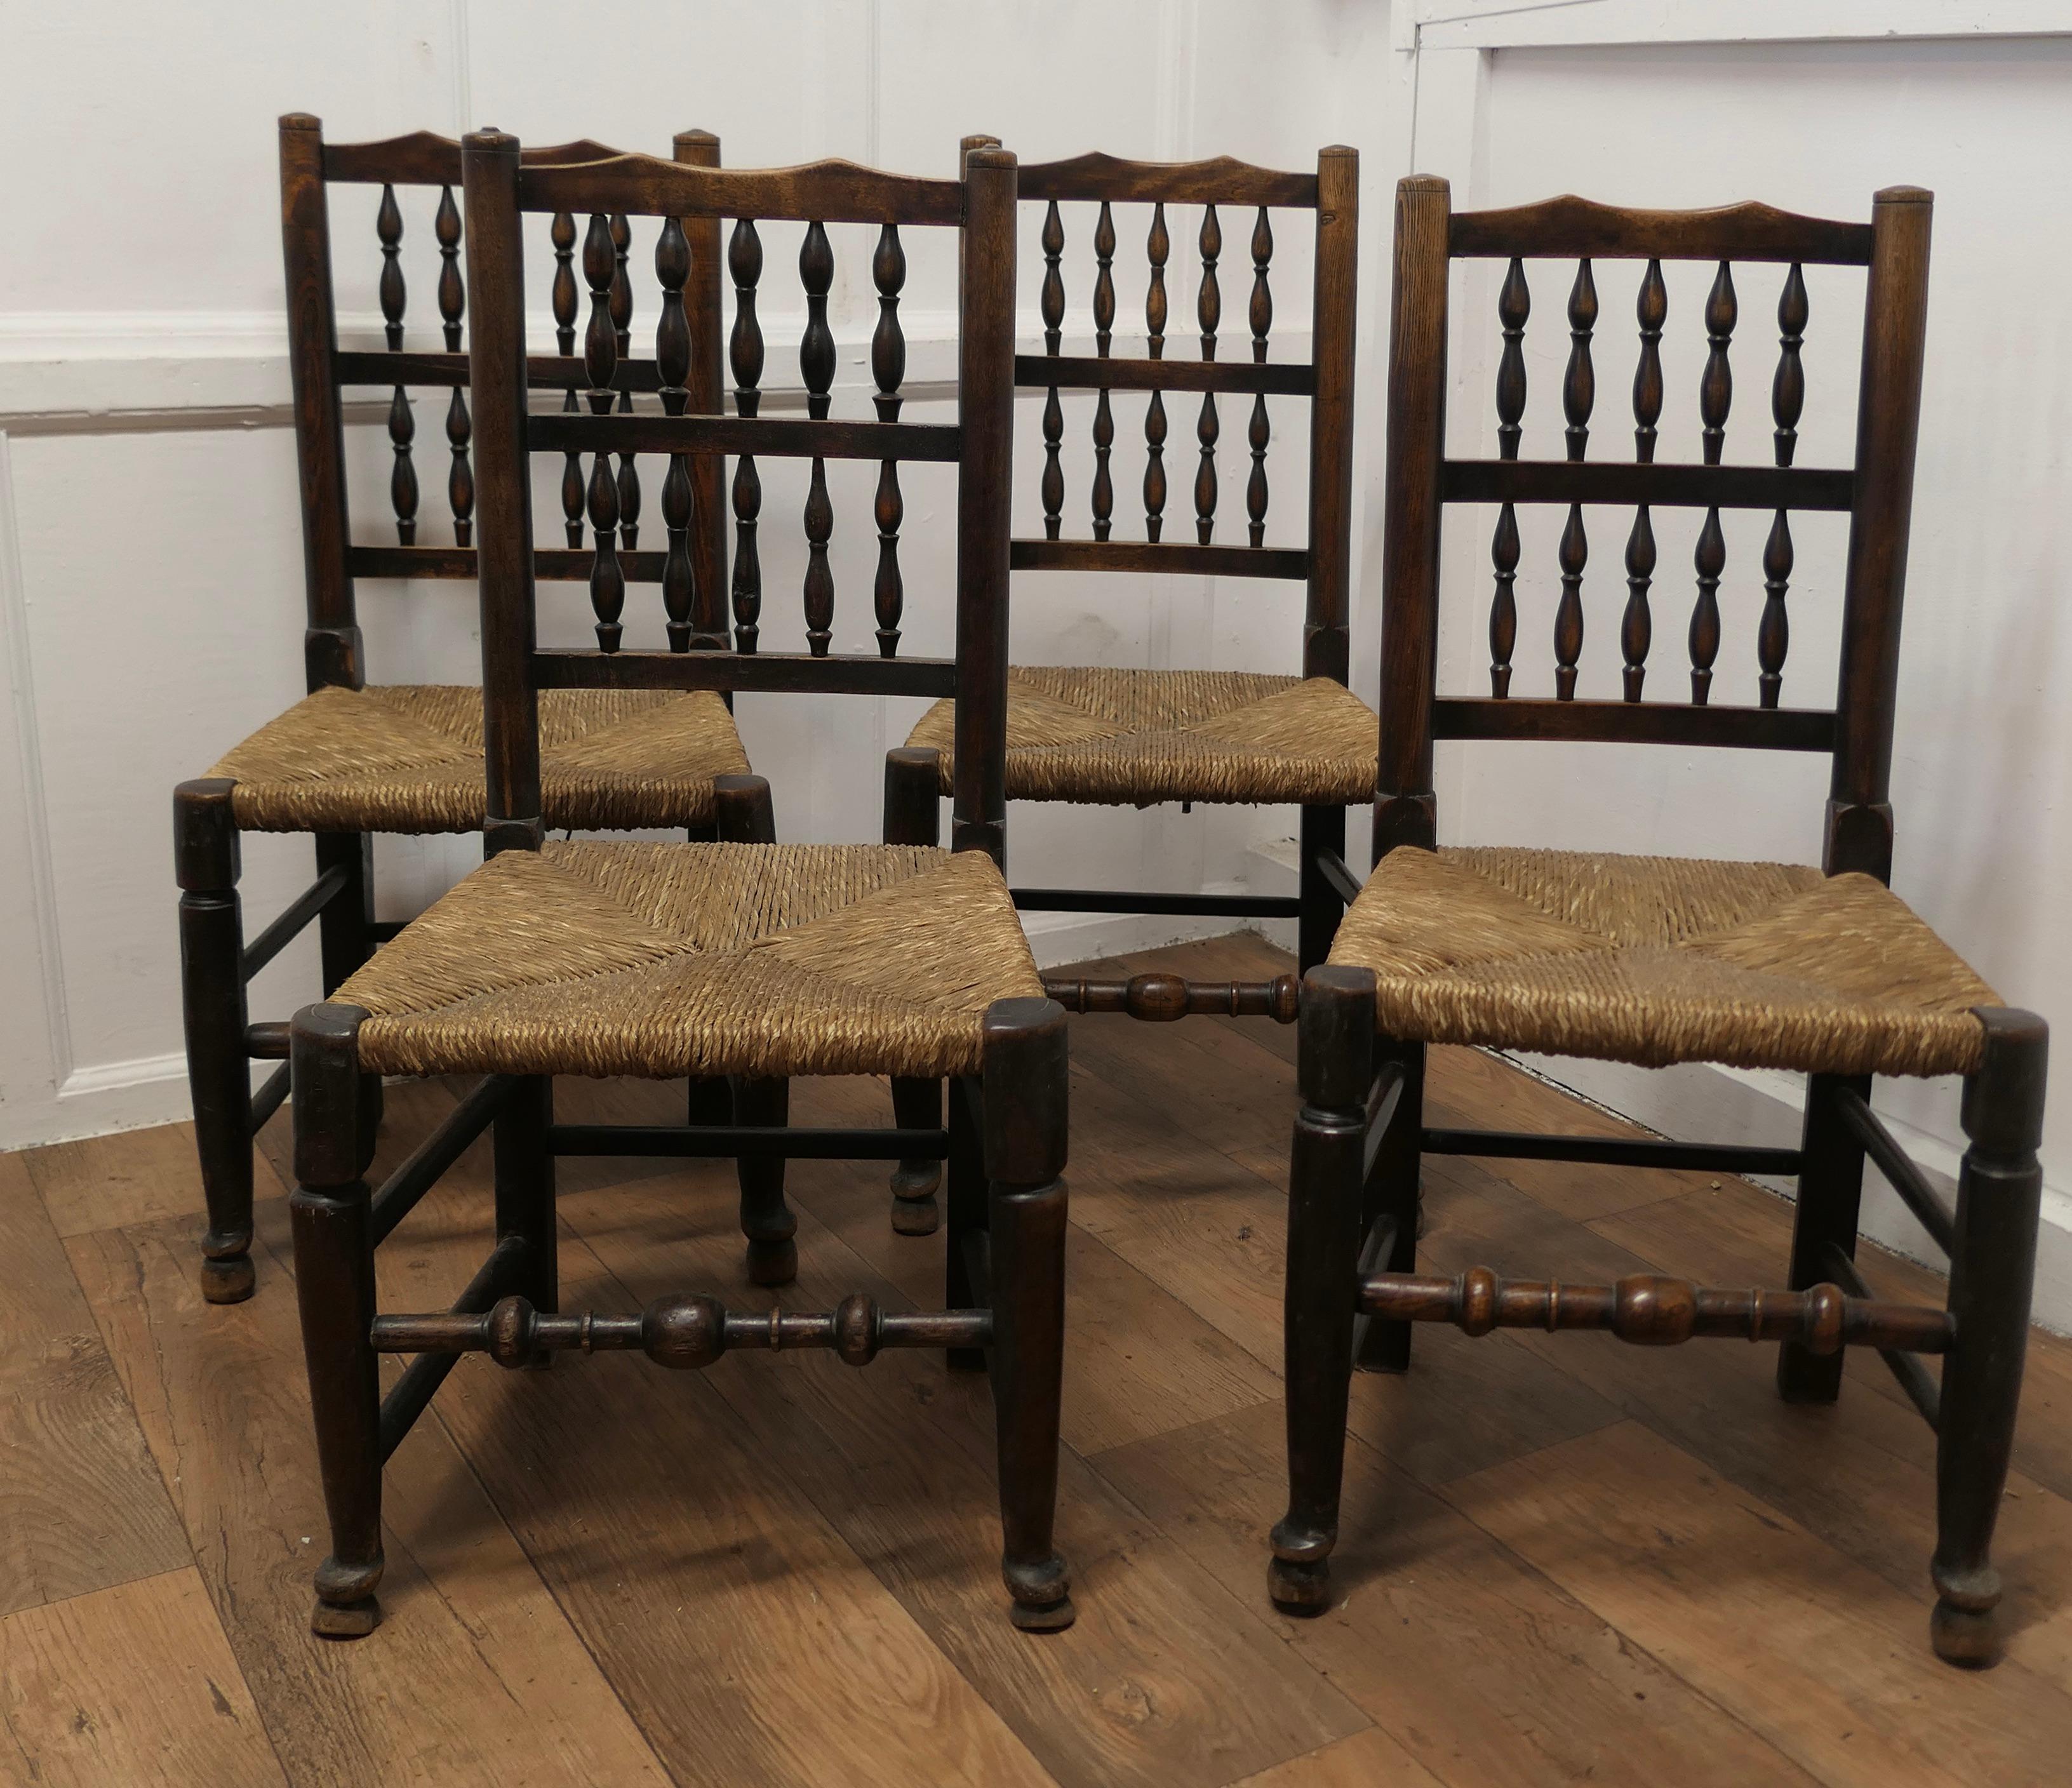 A Set of 4 Lancashire Spindle Back Farmhouse Kitchen Dining Chairs

This very attractive set of chairs with turned spindle backs have sturdy pad feet and turned stretchers all round for strength, the front stretcher is very chunky
The chairs have